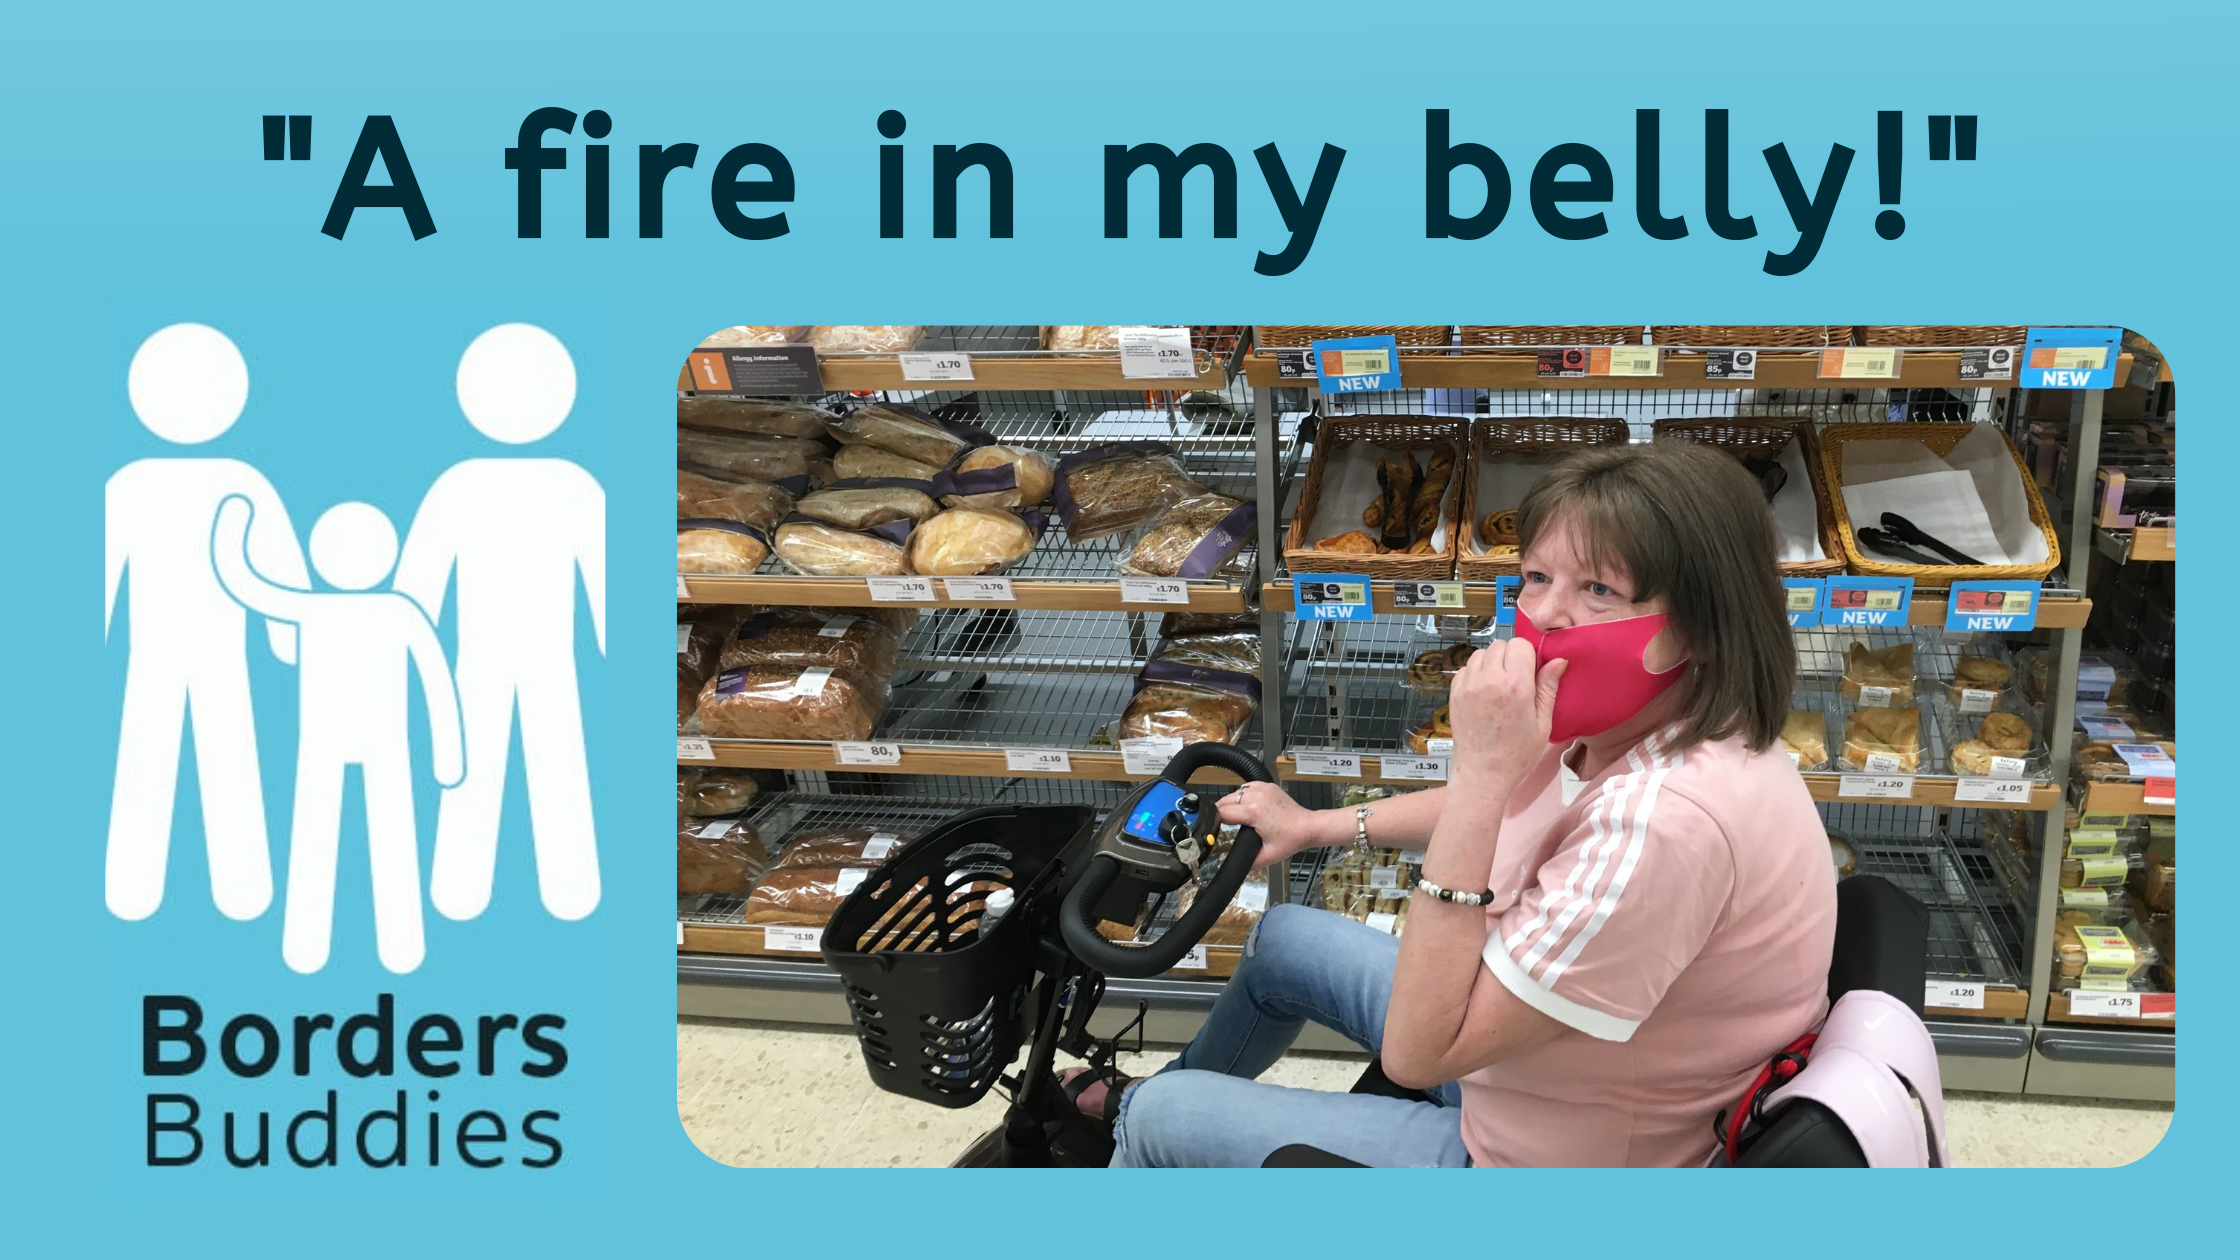 A fire in my belly! The image shows the Borders Buddies logo, and a photo of a woman with a pink face mask, using a mobility scooter, in a supermarket bread aisle.